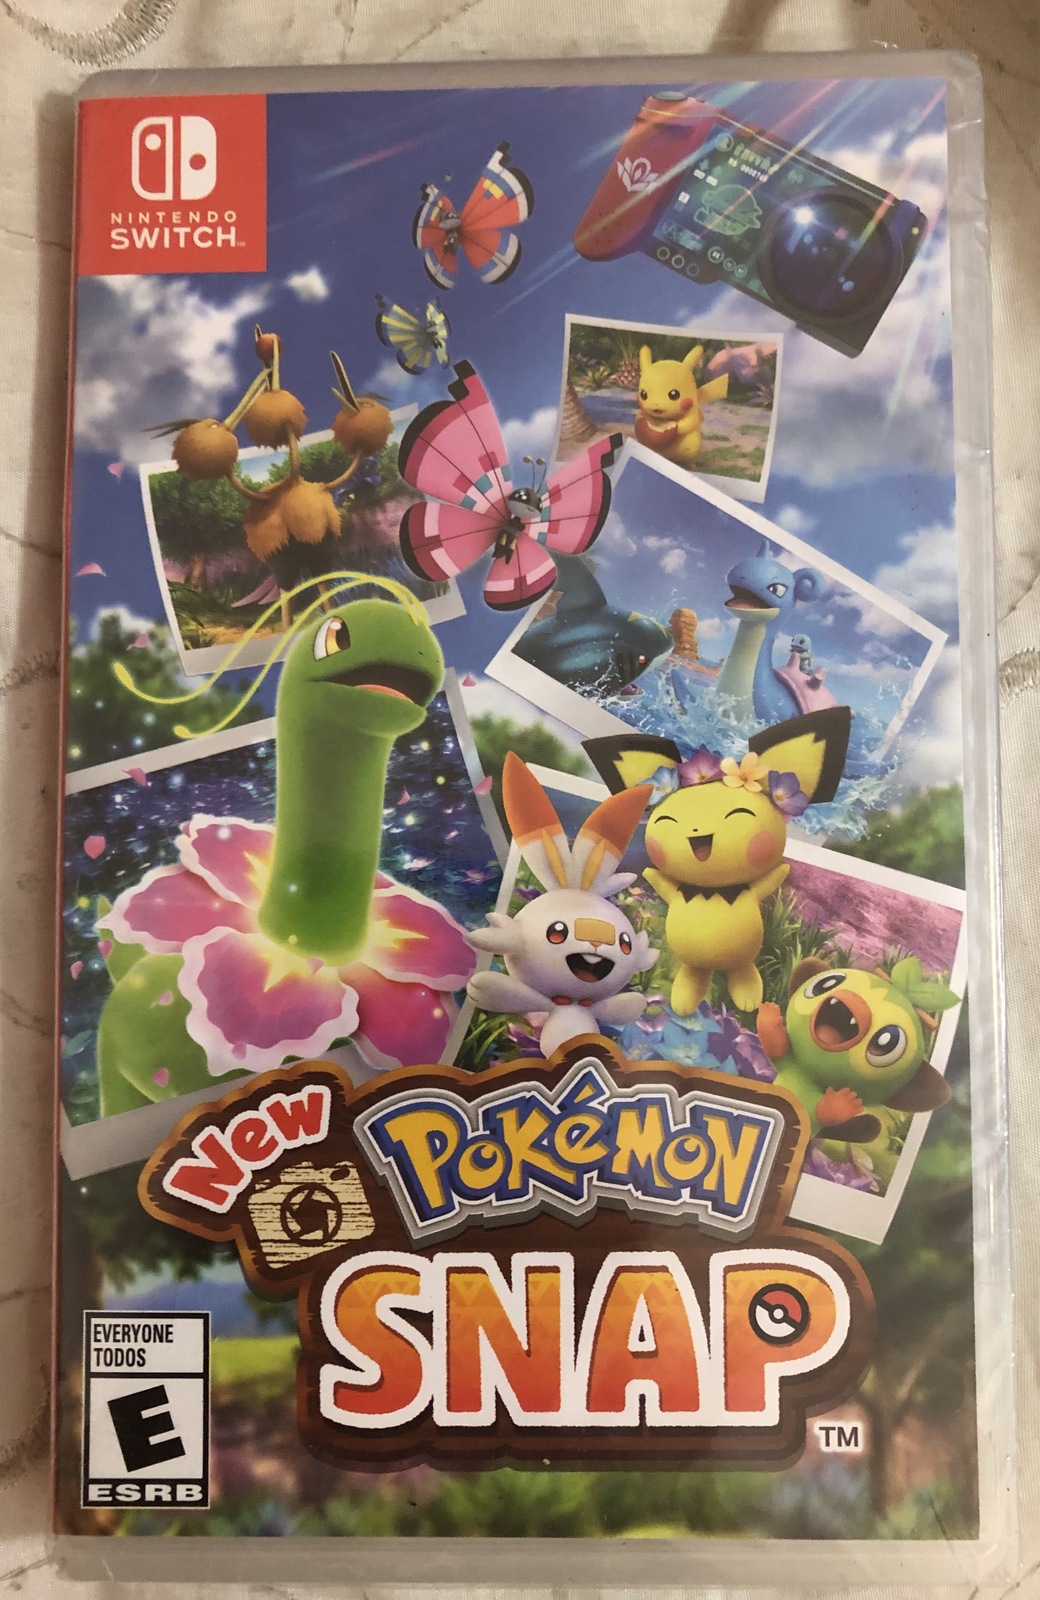 New Pokemon Snap - (Nintendo Switch, 2021) New Release Rated E